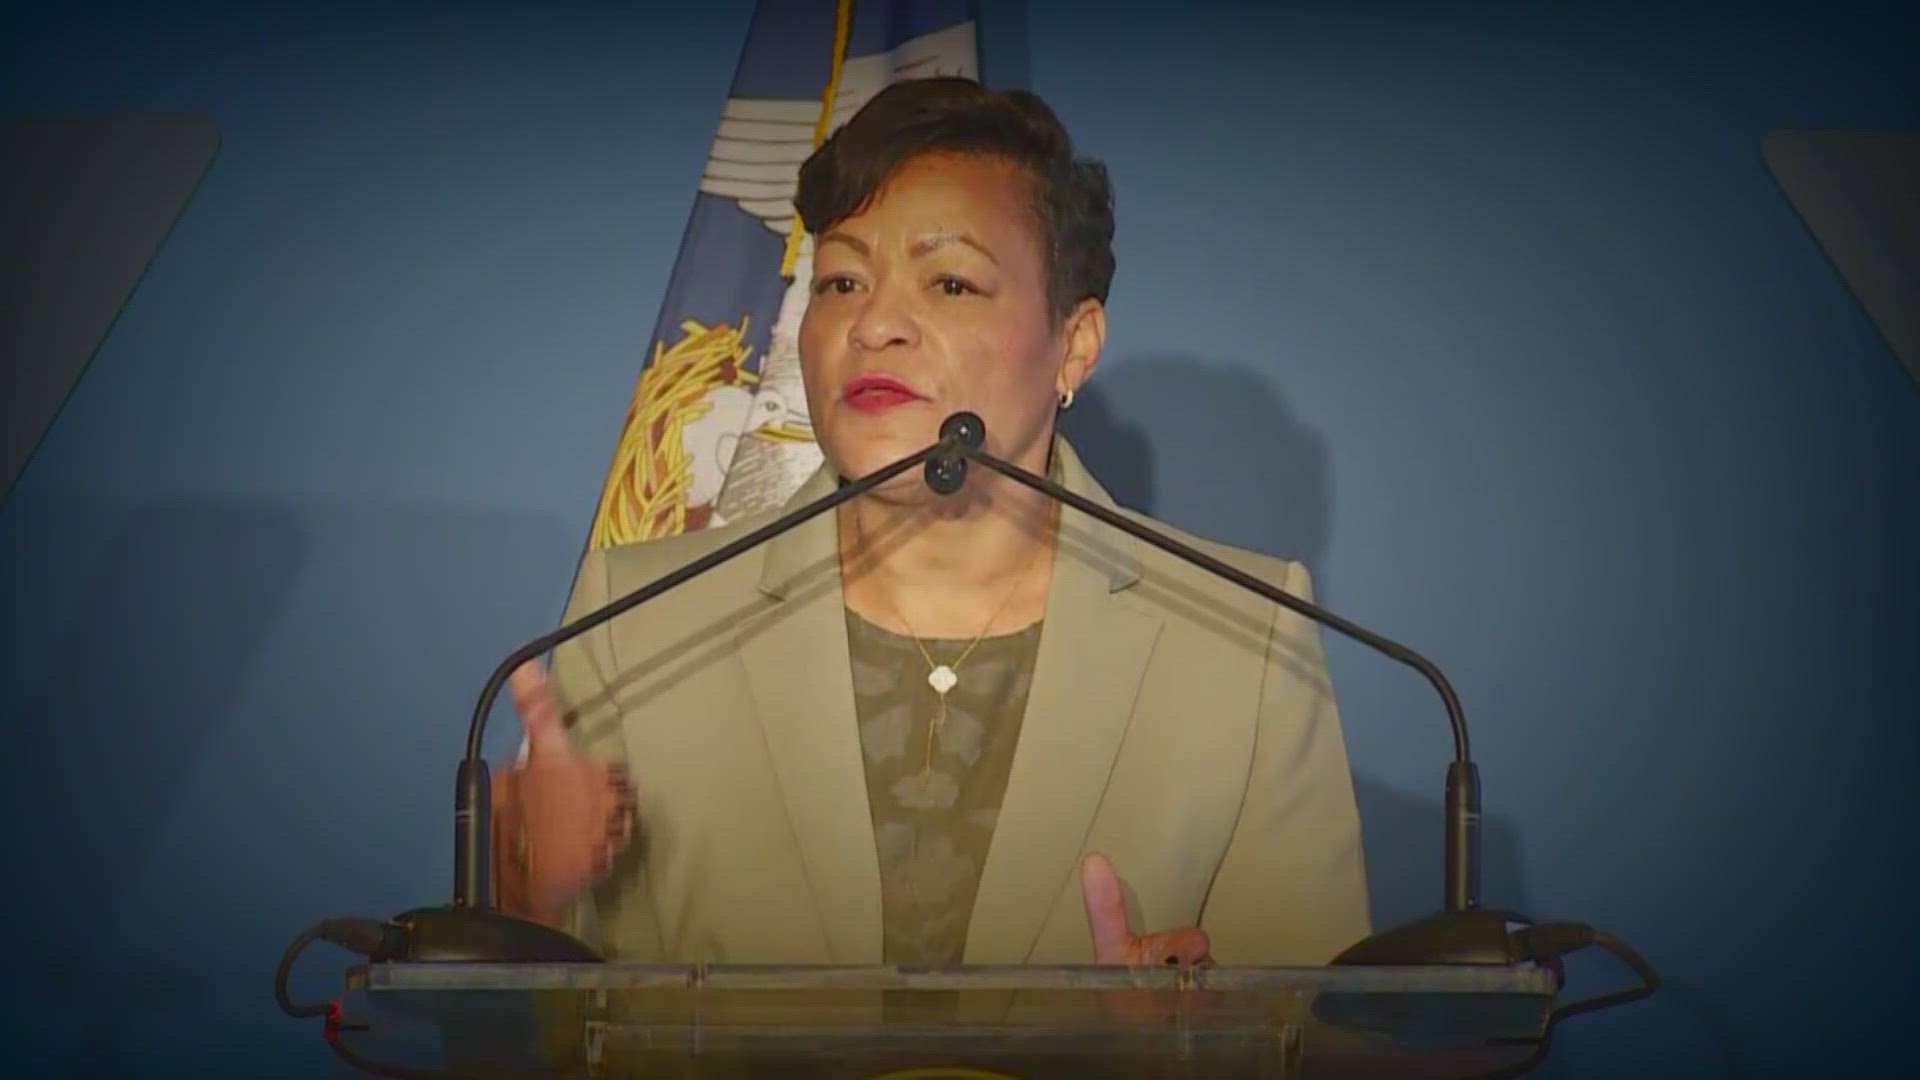 The leaders behind the campaign to recall New Orleans Mayor LaToya Cantrell say their efforts were 'doomed' from the start.